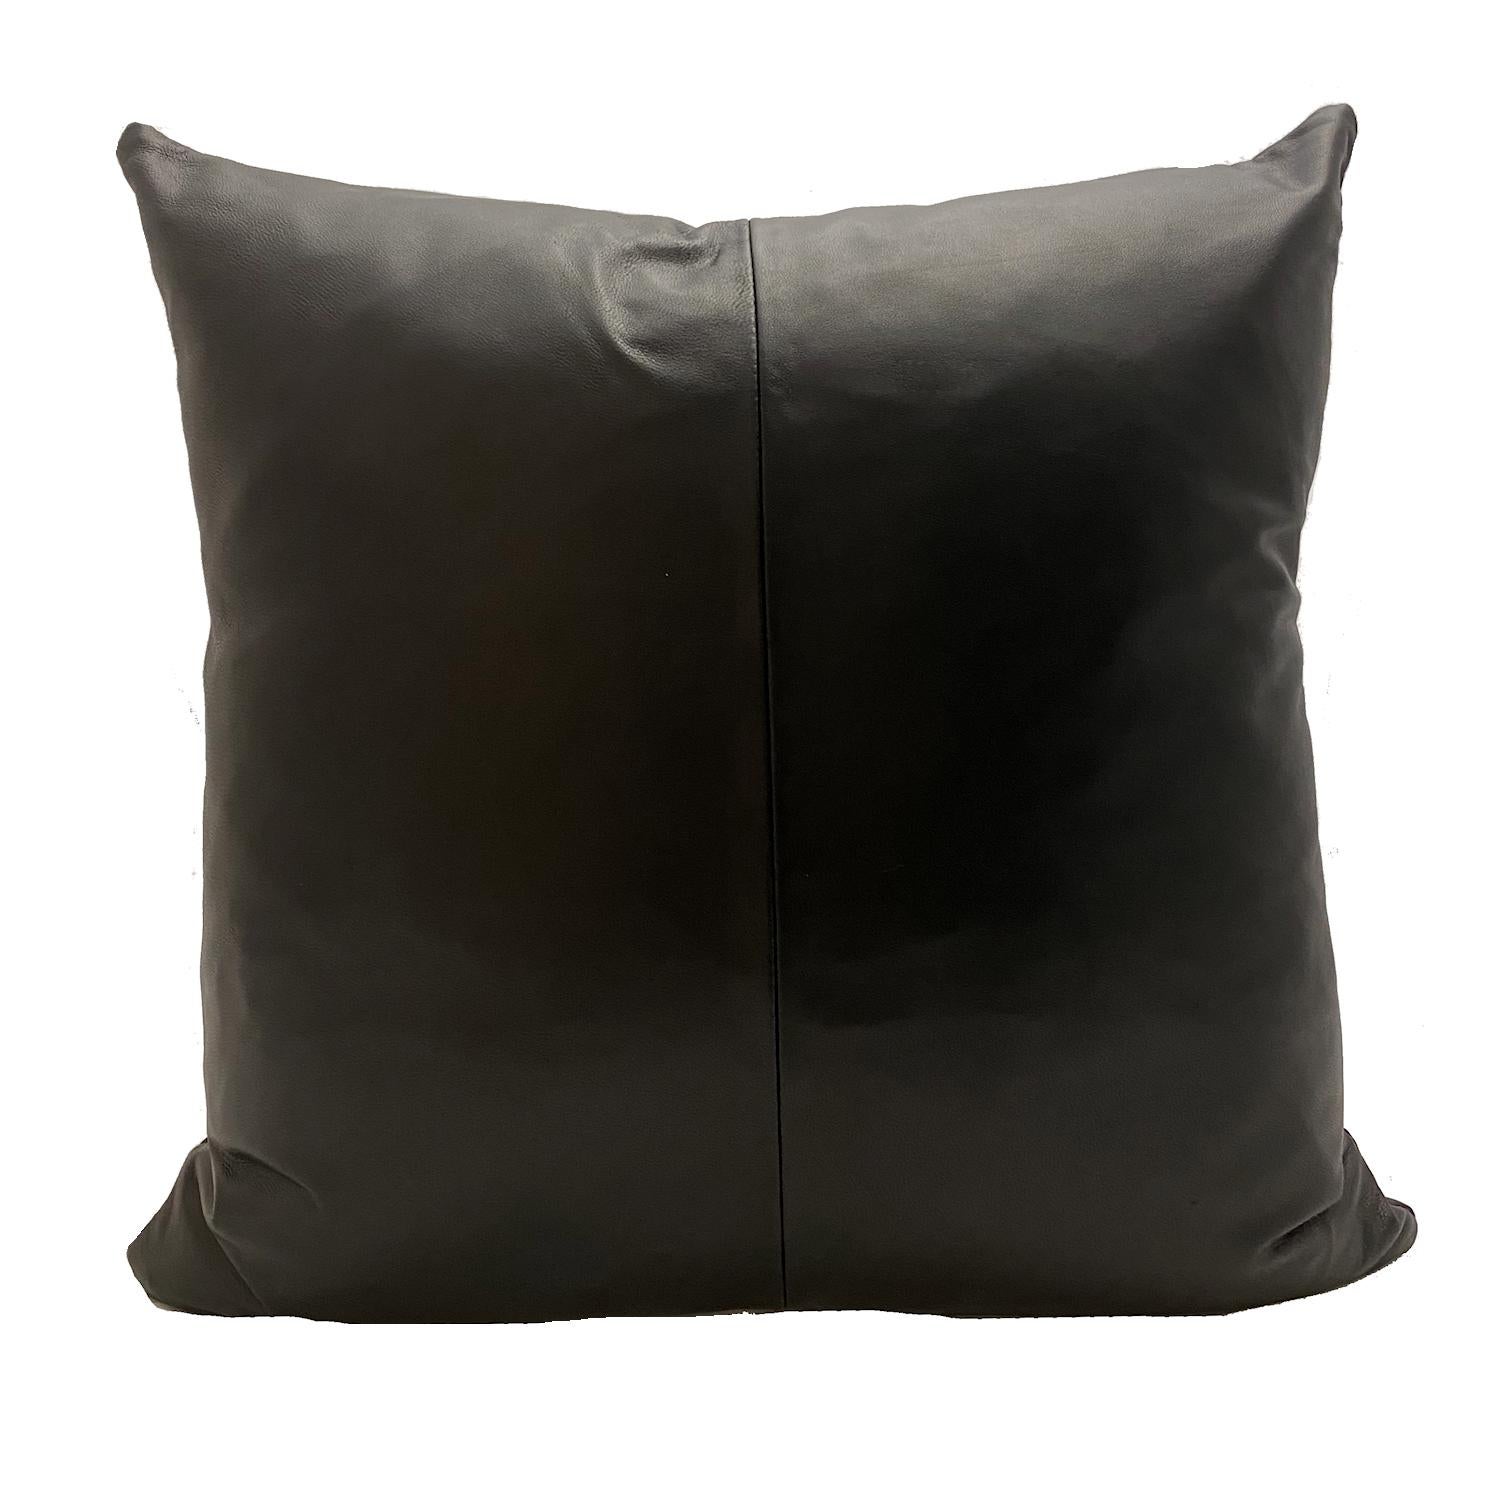 Black Leather Pillow with Leather Cross Stitch For Sale at 1stDibs